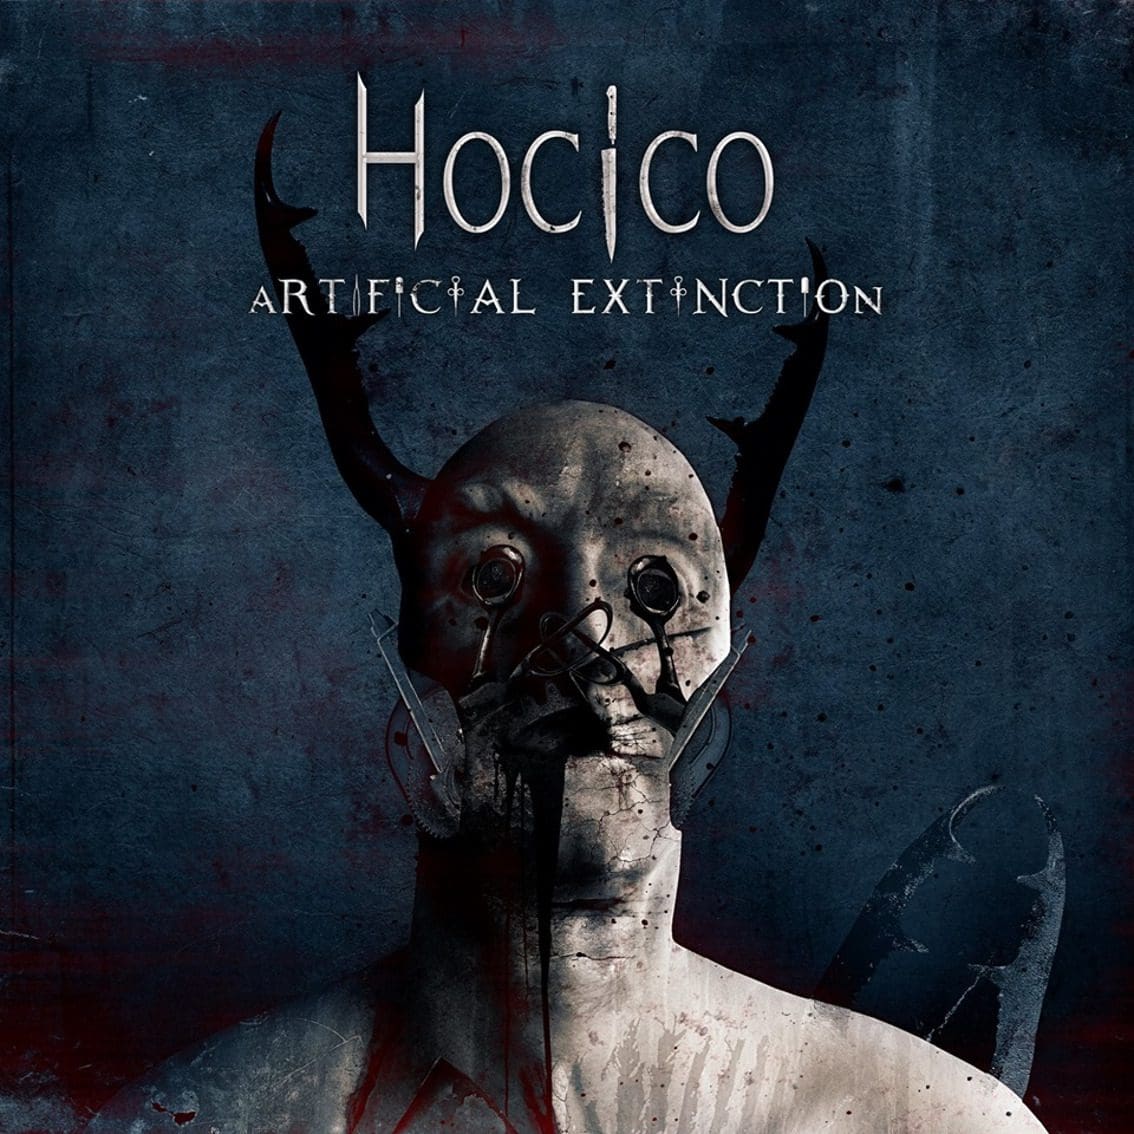 New Hocico album 'Artificial Extinction' sees release in 3 formats: 2LP, 2CD Box, CD